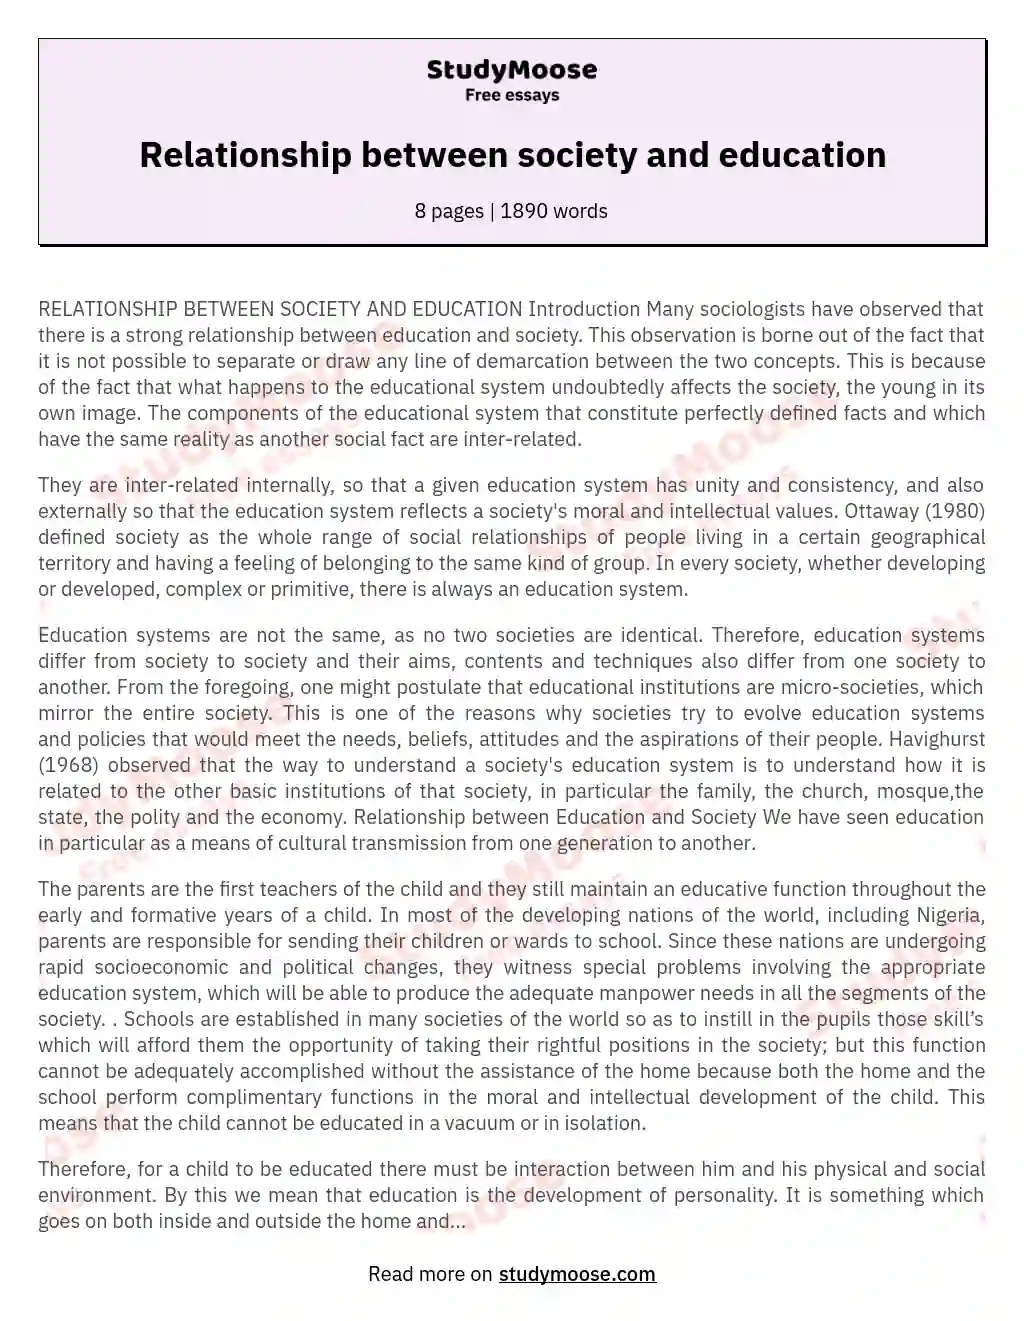 Relationship between society and education essay